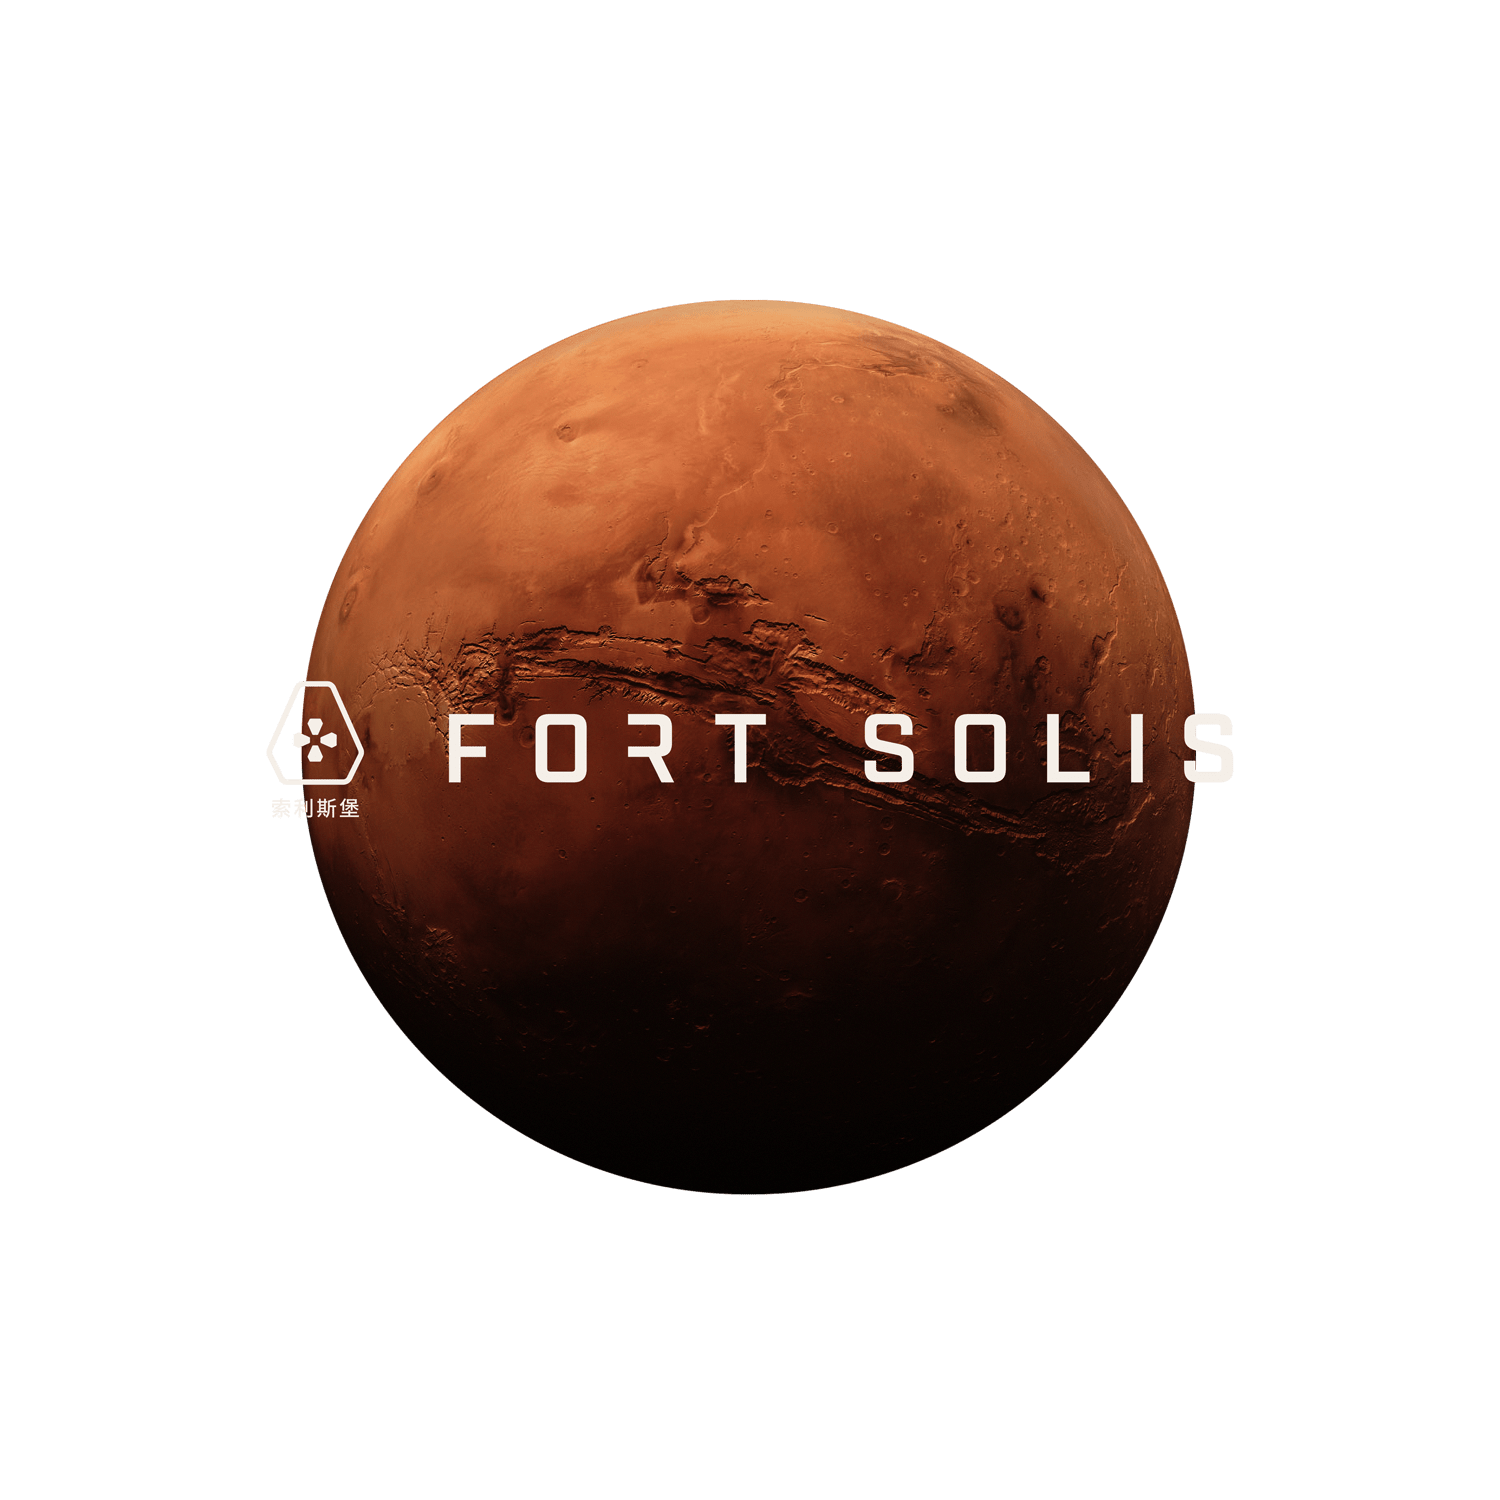 Narrative sci-fi potboiler Fort Solis is out now on PS5 and PCNews